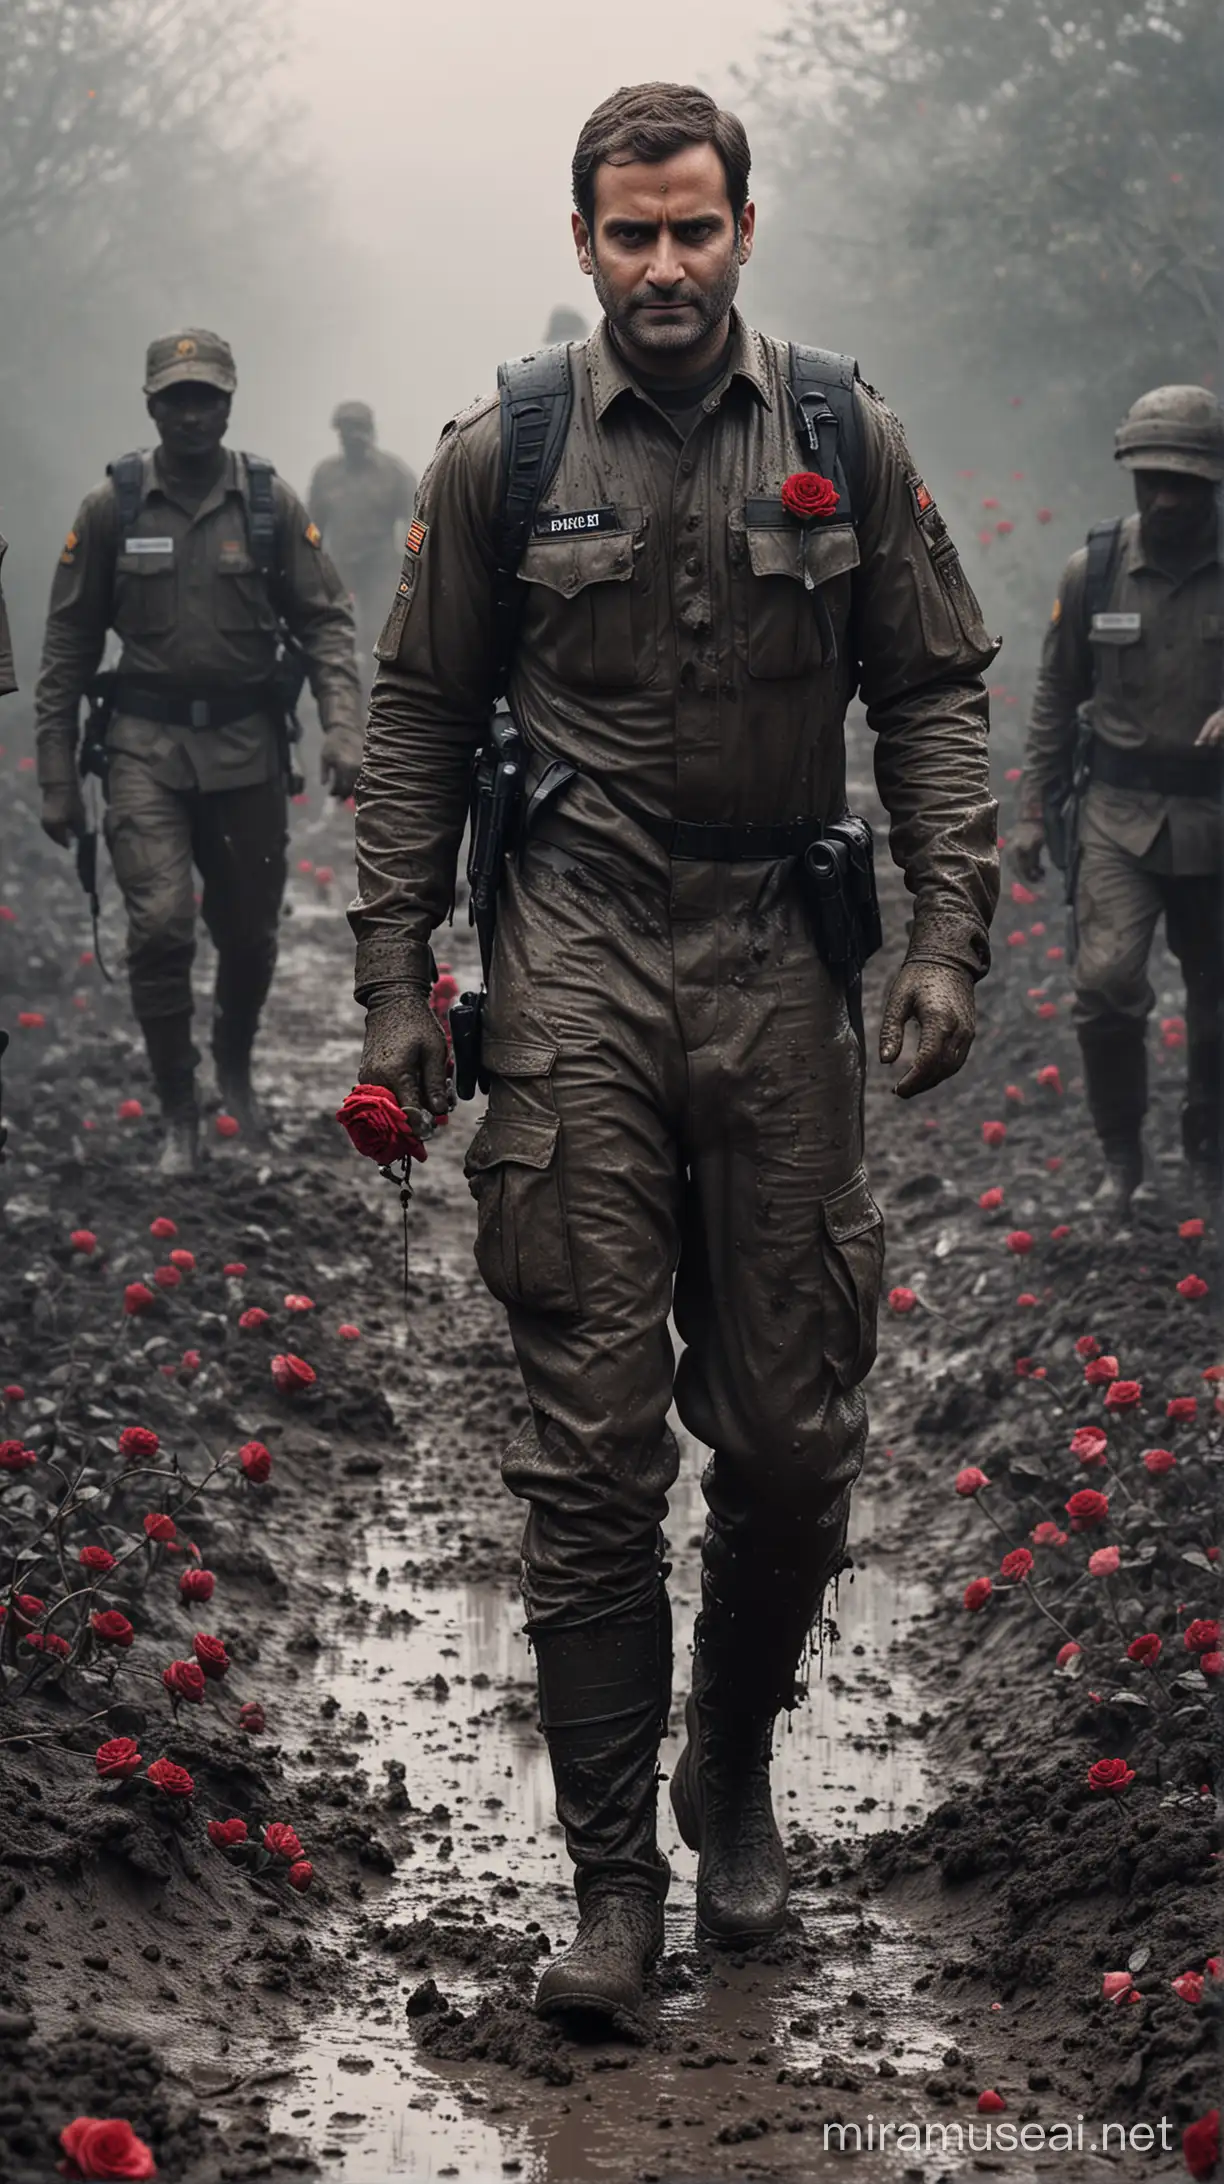 Thermal Camera effect, Rahul Gandhi emerges from the mud with an roses, hyper realistic, cinematic shot, 40k, dark atmosphere, fog, military outfit, His body covered in mud